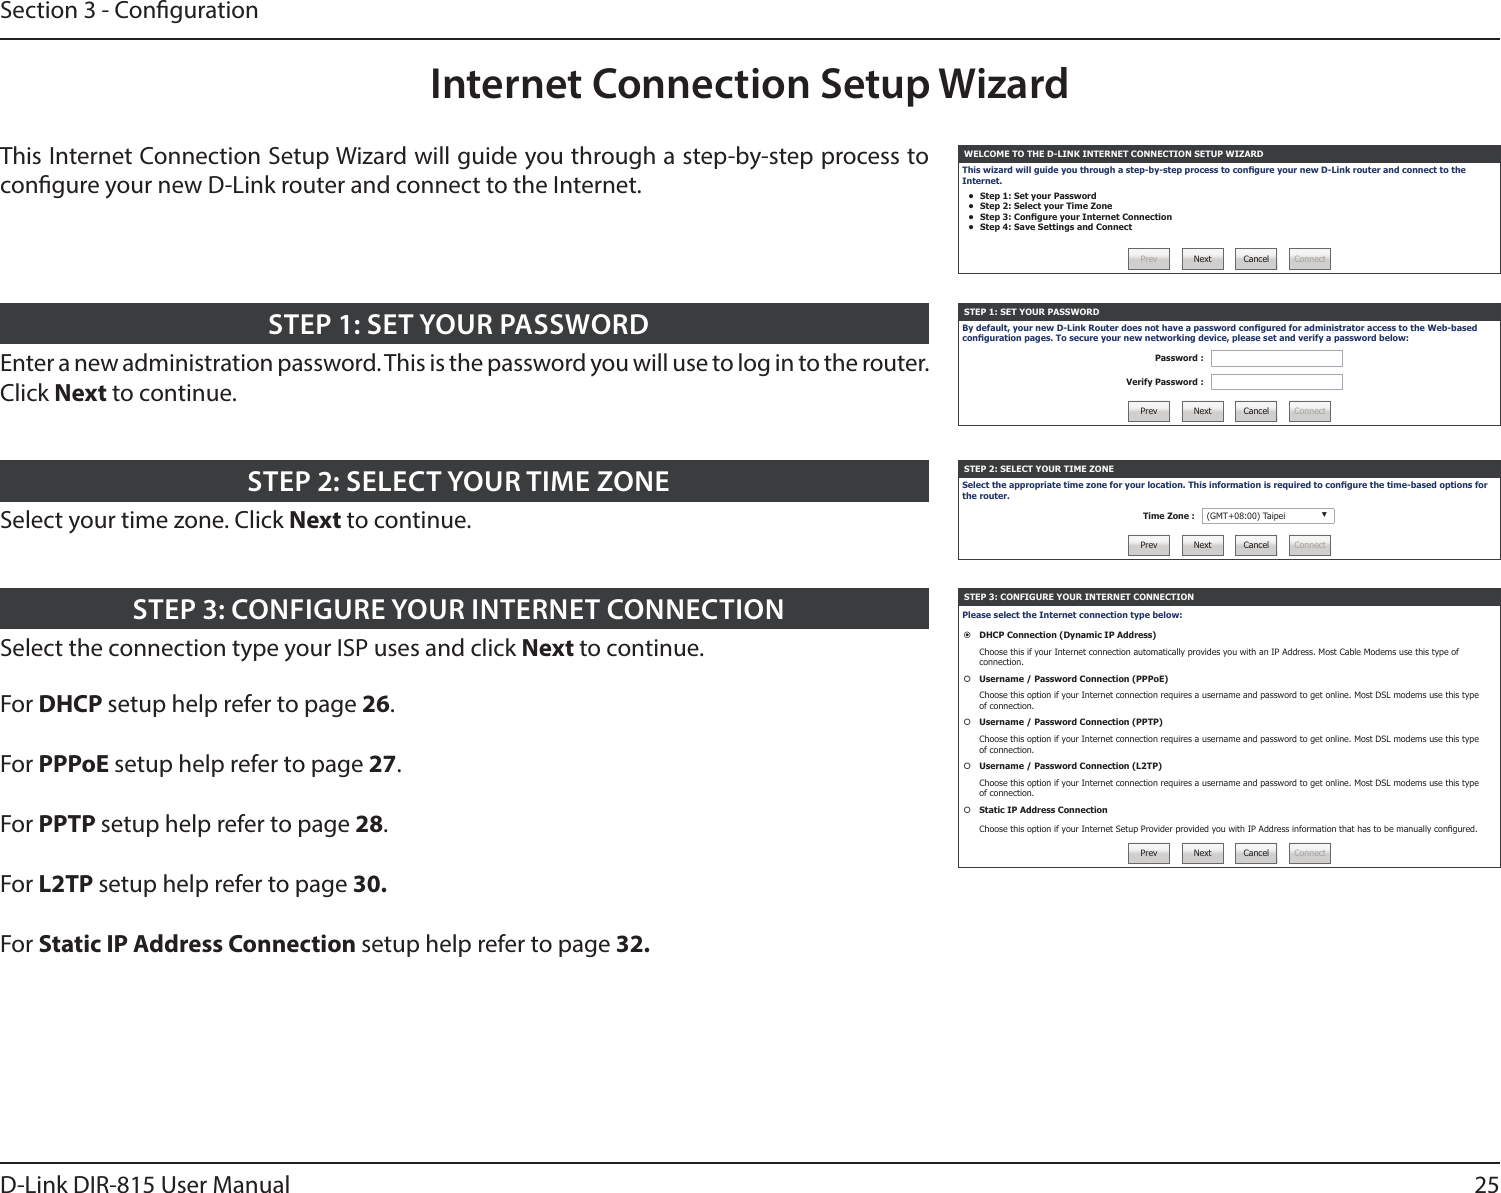 25D-Link DIR-815 User ManualSection 3 - CongurationInternet Connection Setup WizardWELCOME TO THE D-LINK INTERNET CONNECTION SETUP WIZARDThis wizard will guide you through a step-by-step process to congure your new D-Link router and connect to the Internet.•  Step 1: Set your Password•  Step 2: Select your Time Zone•  Step 3: Congure your Internet Connection•  Step 4: Save Settings and ConnectPrev Next Cancel ConnectSTEP 1: SET YOUR PASSWORDBy default, your new D-Link Router does not have a password congured for administrator access to the Web-based conguration pages. To secure your new networking device, please set and verify a password below:Password :Verify Password :Prev Next Cancel ConnectSTEP 2: SELECT YOUR TIME ZONESelect the appropriate time zone for your location. This information is required to congure the time-based options for the router.Time Zone : (GMT+08:00) Taipei ▼Prev Next Cancel ConnectSTEP 3: CONFIGURE YOUR INTERNET CONNECTIONPlease select the Internet connection type below:DHCP Connection (Dynamic IP Address)Choose this if your Internet connection automatically provides you with an IP Address. Most Cable Modems use this type of connection.Username / Password Connection (PPPoE)Choose this option if your Internet connection requires a username and password to get online. Most DSL modems use this type of connection.Username / Password Connection (PPTP)Choose this option if your Internet connection requires a username and password to get online. Most DSL modems use this type of connection.Username / Password Connection (L2TP)Choose this option if your Internet connection requires a username and password to get online. Most DSL modems use this type of connection.Static IP Address ConnectionChoose this option if your Internet Setup Provider provided you with IP Address information that has to be manually congured.Prev Next Cancel ConnectThis Internet Connection Setup Wizard will guide you through a step-by-step process to congure your new D-Link router and connect to the Internet.Enter a new administration password. This is the password you will use to log in to the router. Click Next to continue.STEP 1: SET YOUR PASSWORDSelect your time zone. Click Next to continue.STEP 2: SELECT YOUR TIME ZONESelect the connection type your ISP uses and click Next to continue.For DHCP setup help refer to page 26.For PPPoE setup help refer to page 27.For PPTP setup help refer to page 28.For L2TP setup help refer to page 30.For Static IP Address Connection setup help refer to page 32.STEP 3: CONFIGURE YOUR INTERNET CONNECTION